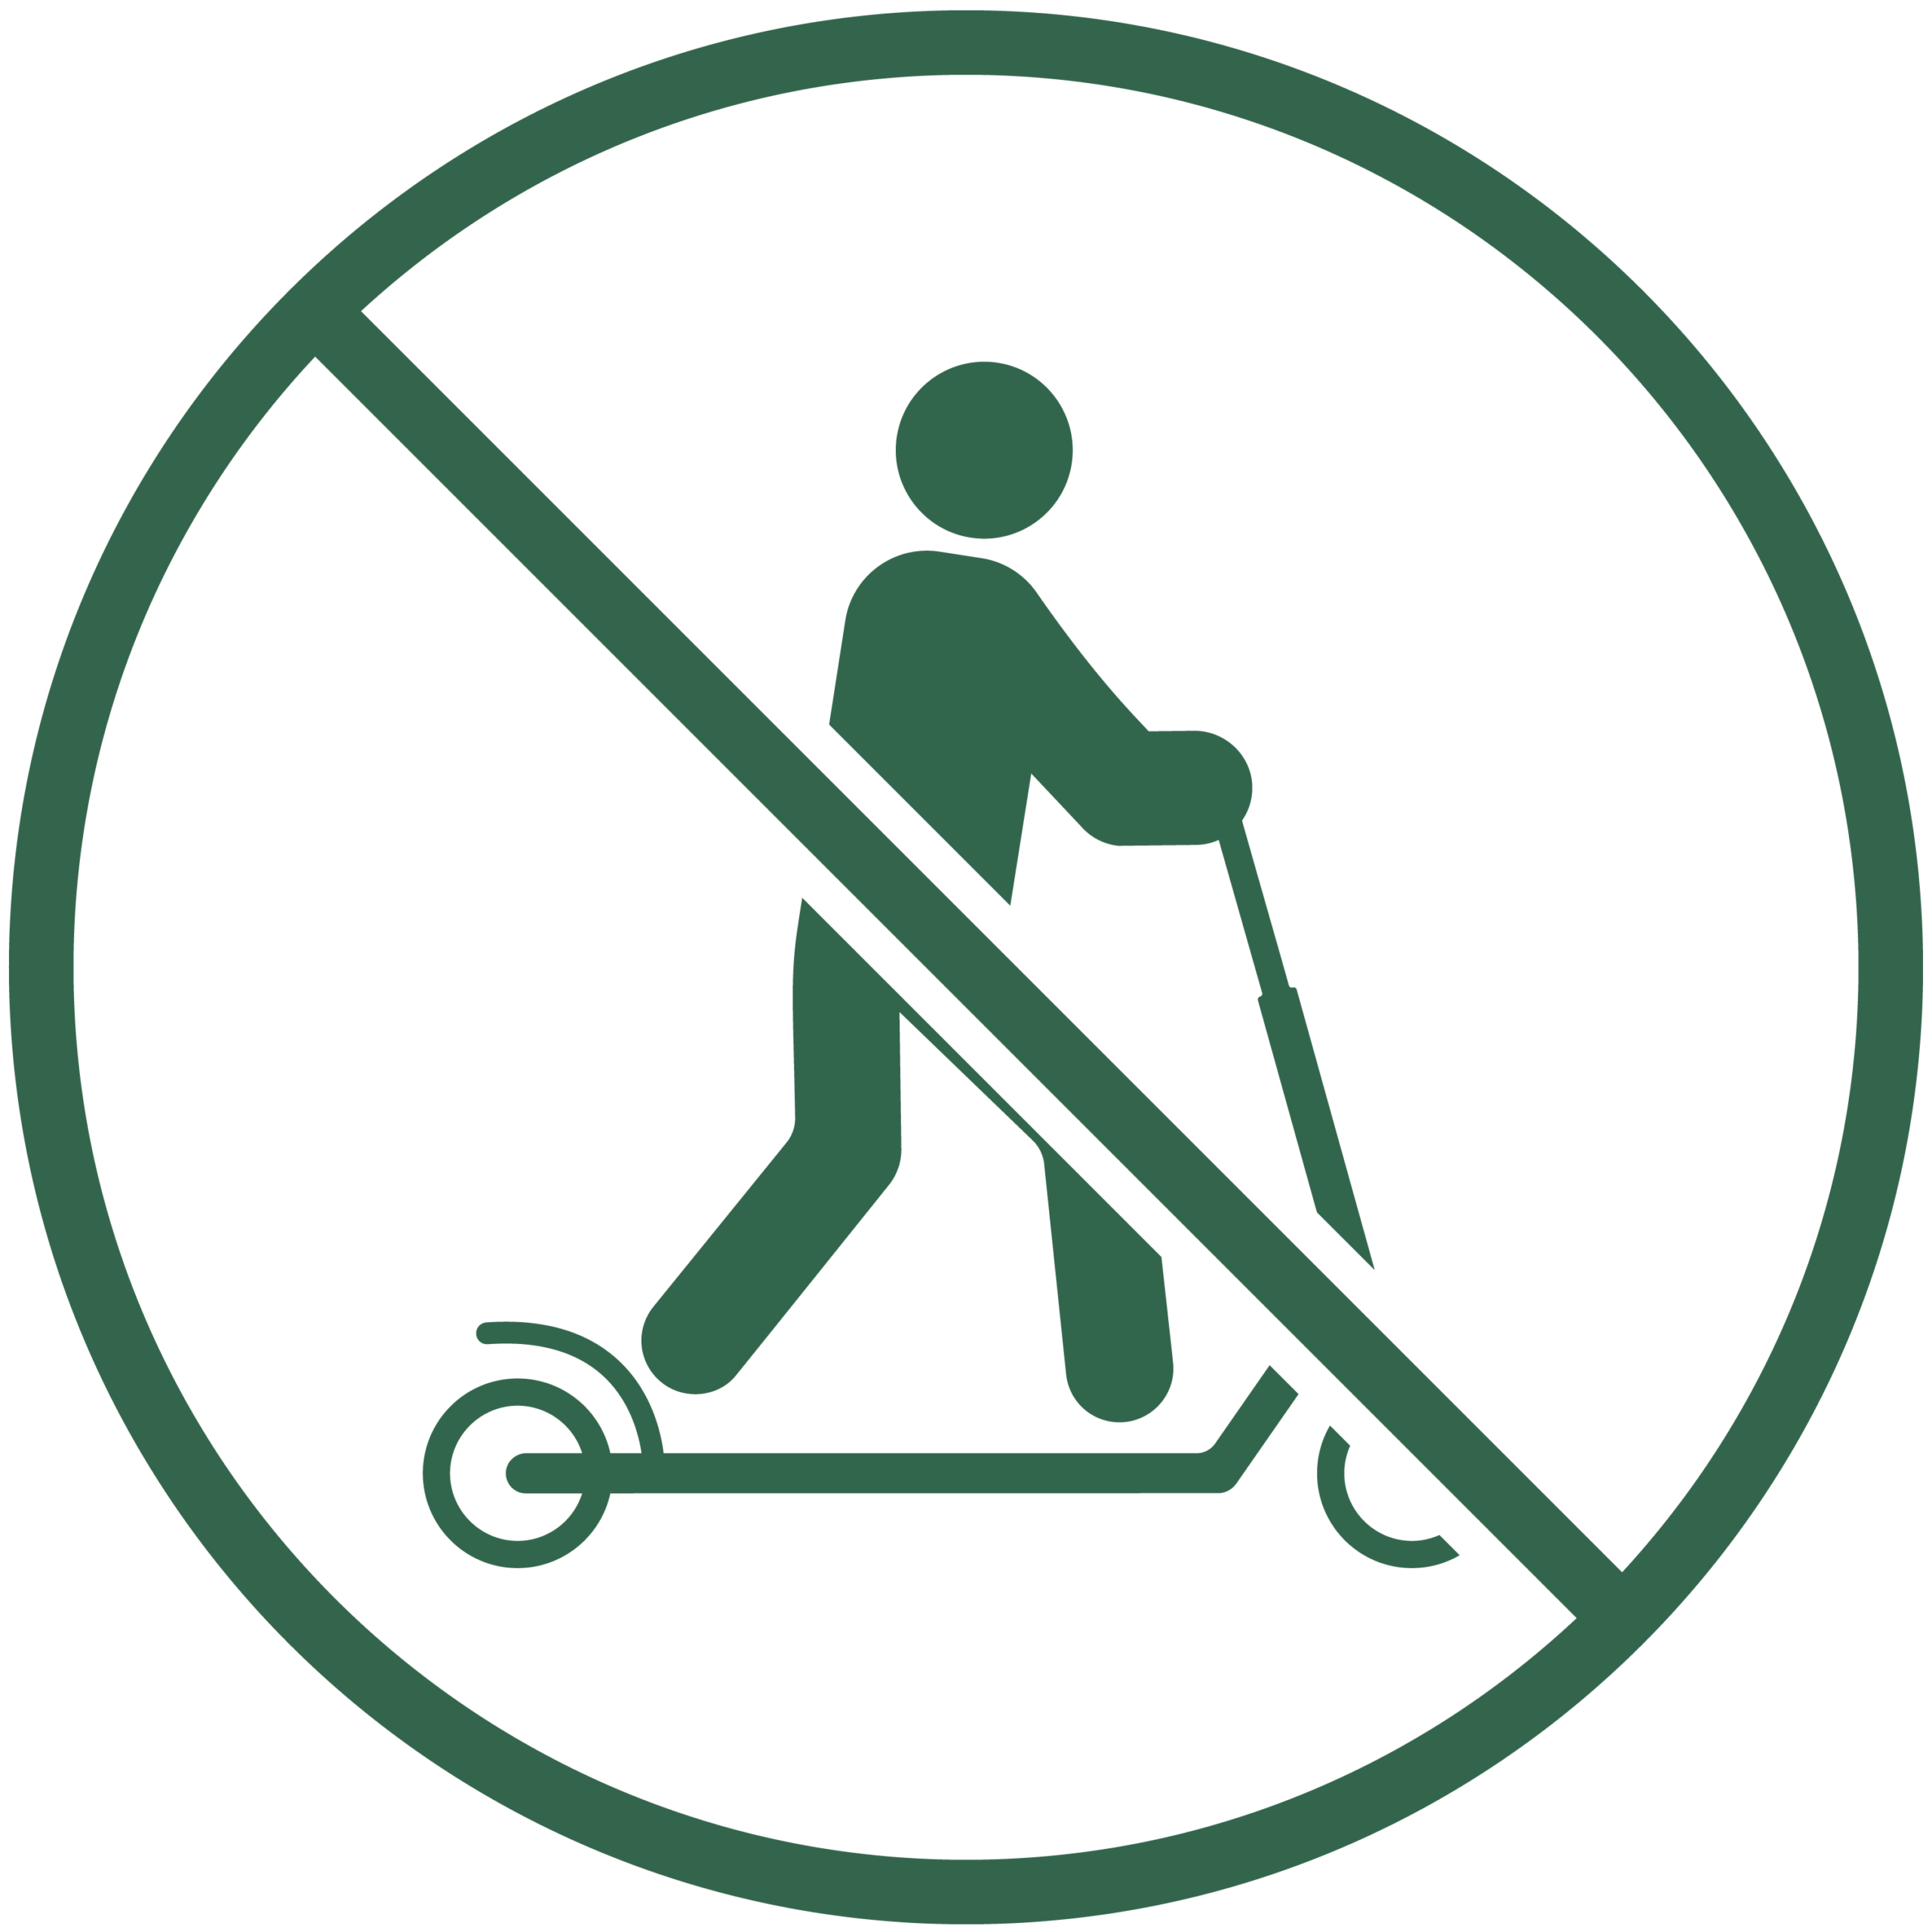 No scooters, bikes, roller skates icon.